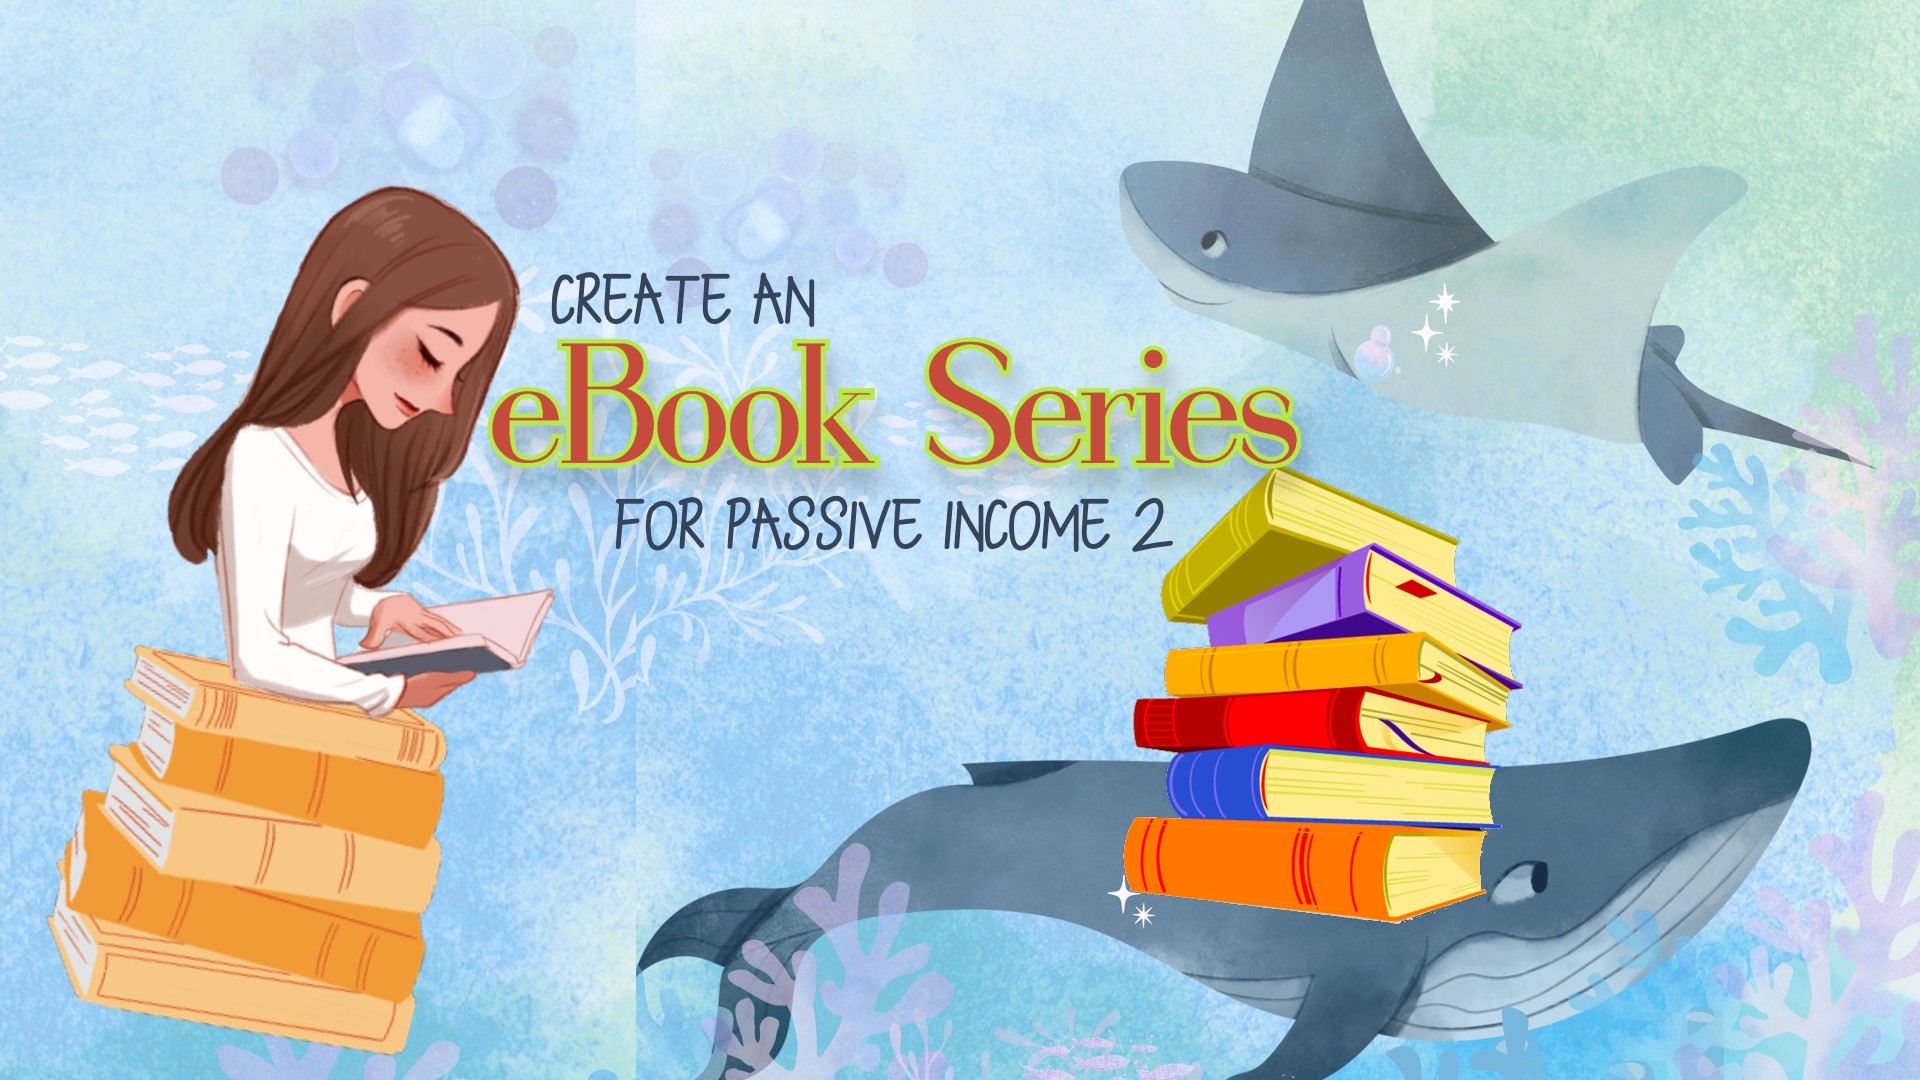 Create an eBook Series for Passive Income 2